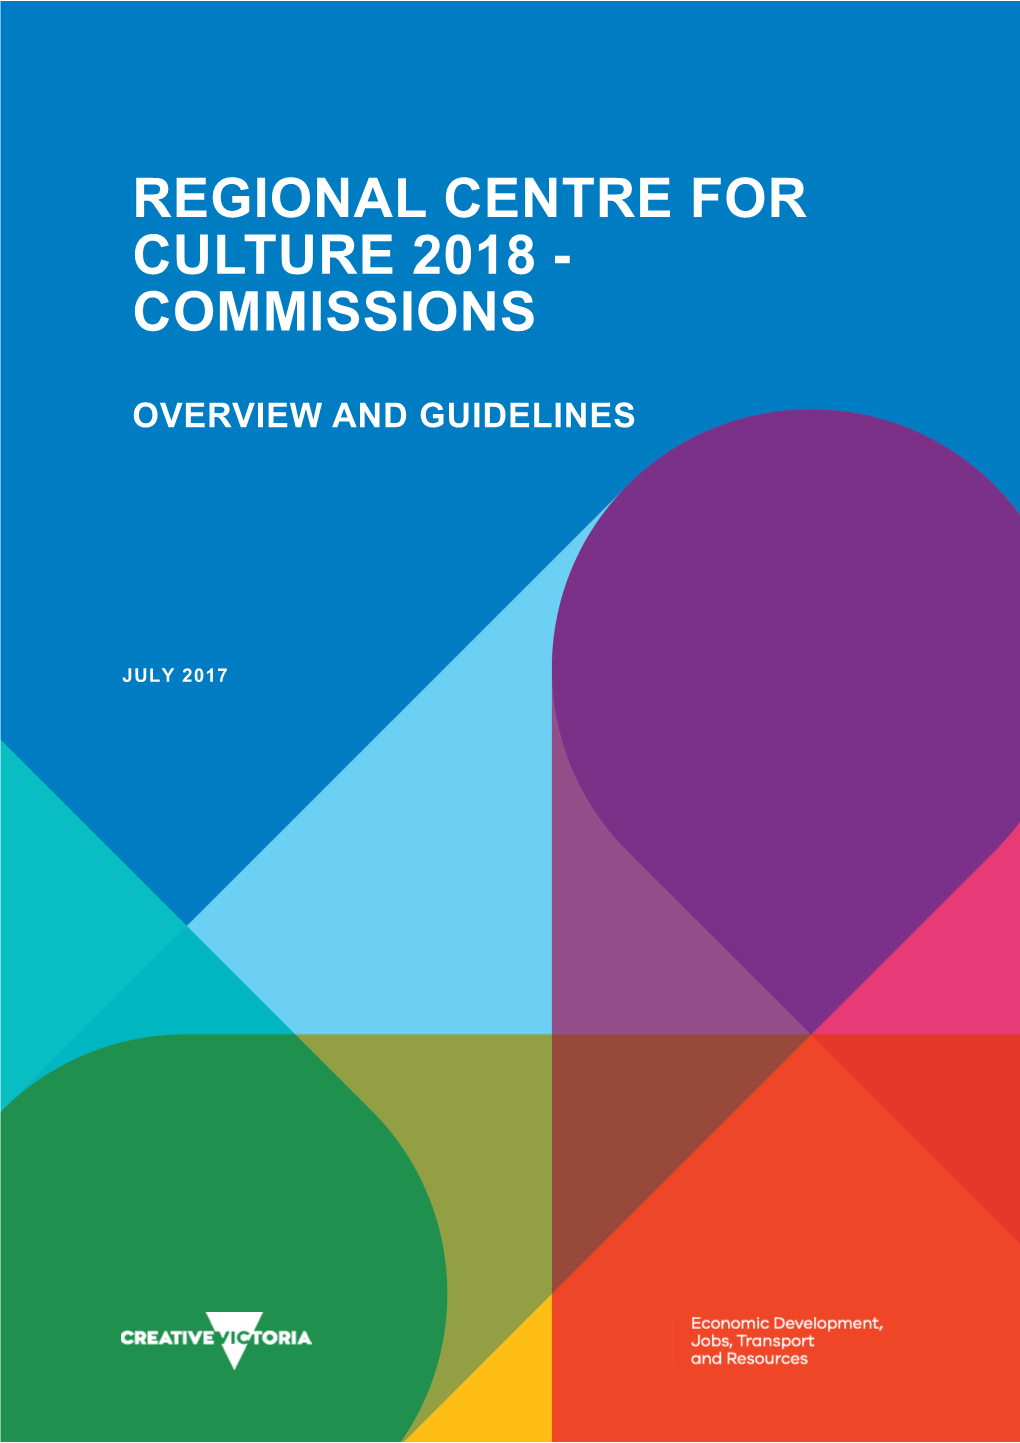 Regional Centre for Culture 2018 - COMMISSIONS OVERVIEW and GUIDELINES